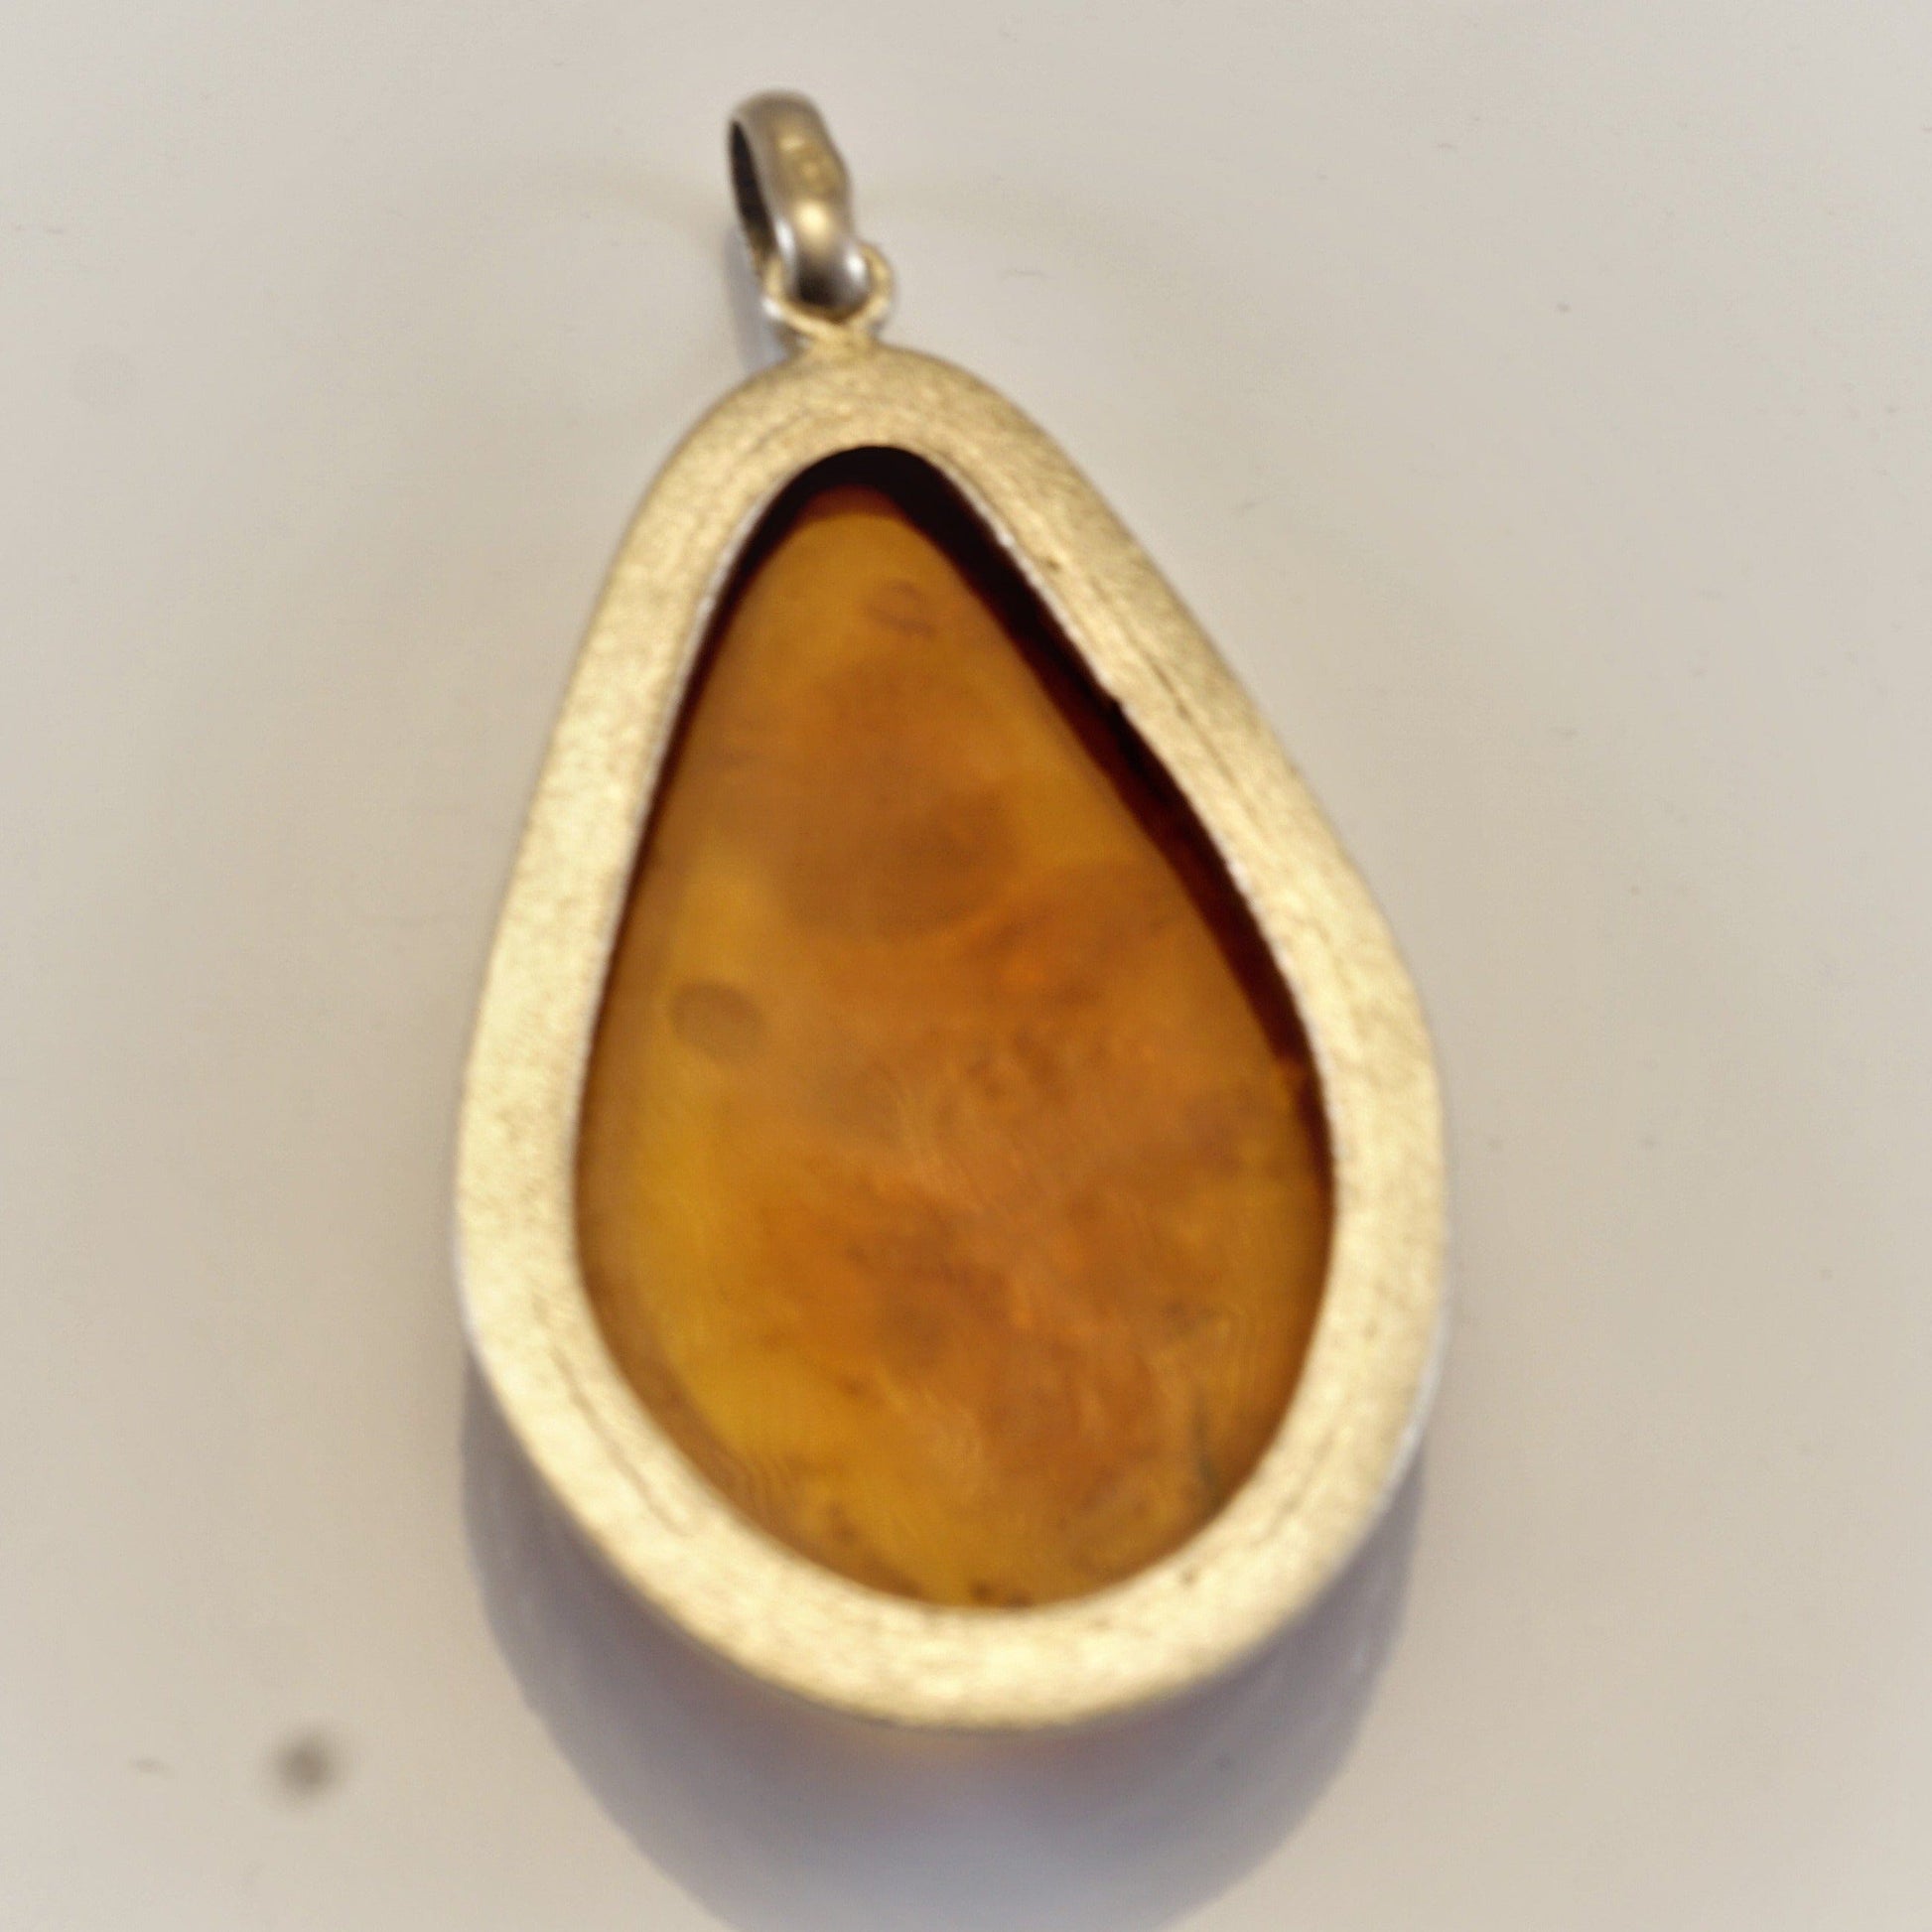 FJL Jewelry Sterling Silver Sold! Natural Amber Vintage Sterling Silver Pendant, X-Large Pear Shaped Baltic Amber Stone_Hand Made